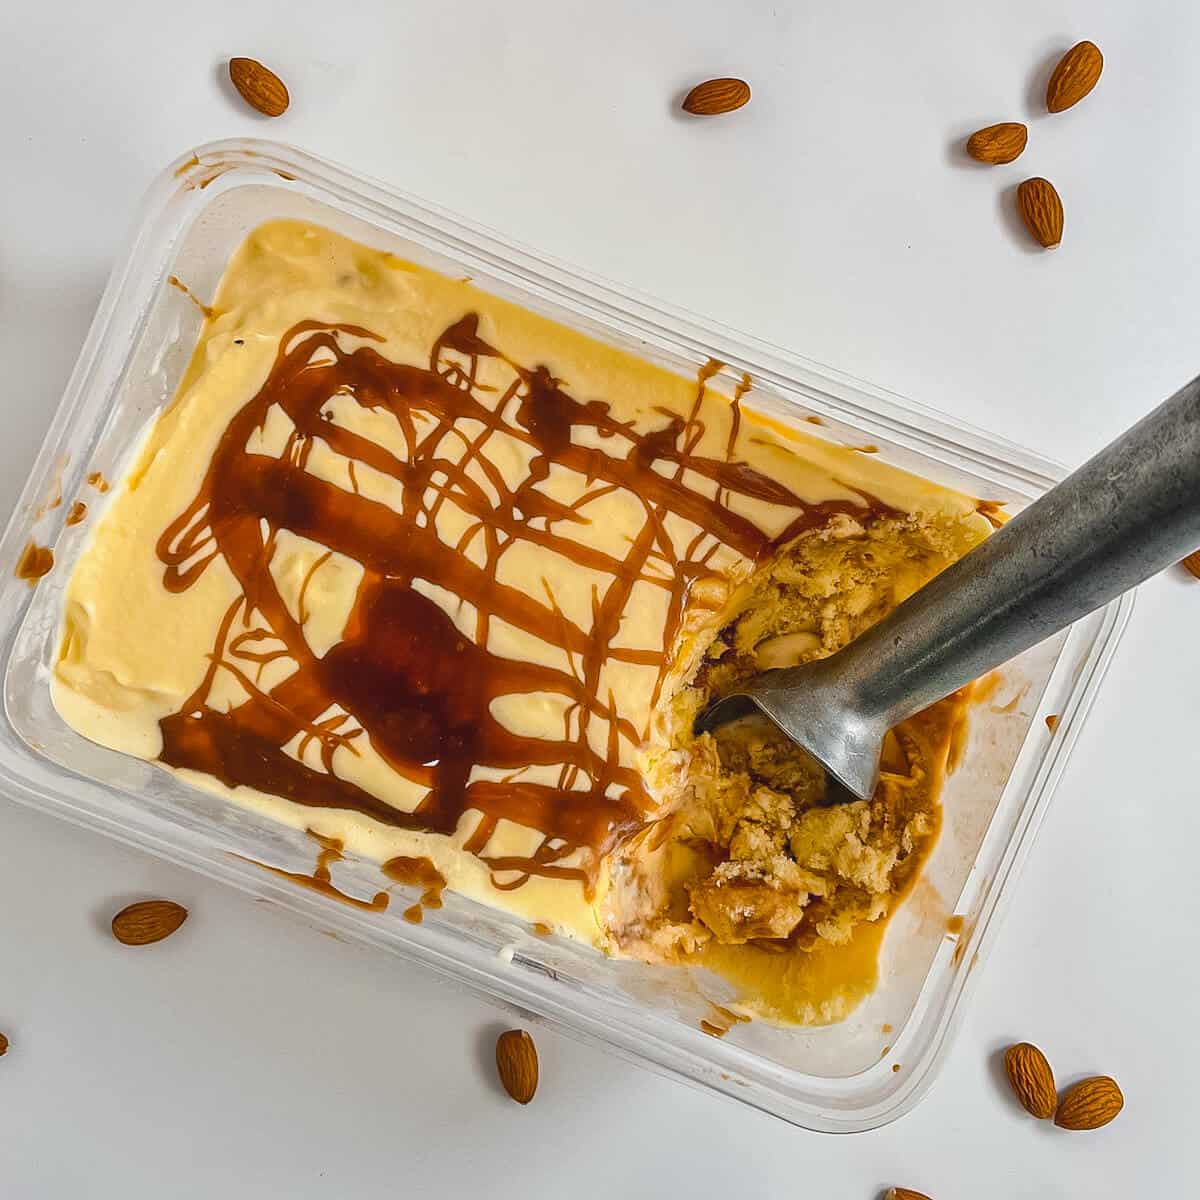 Tub of Caramel Swirl Almond Gelato drizzled with caramel sauce with a scooper & almonds from overhead.